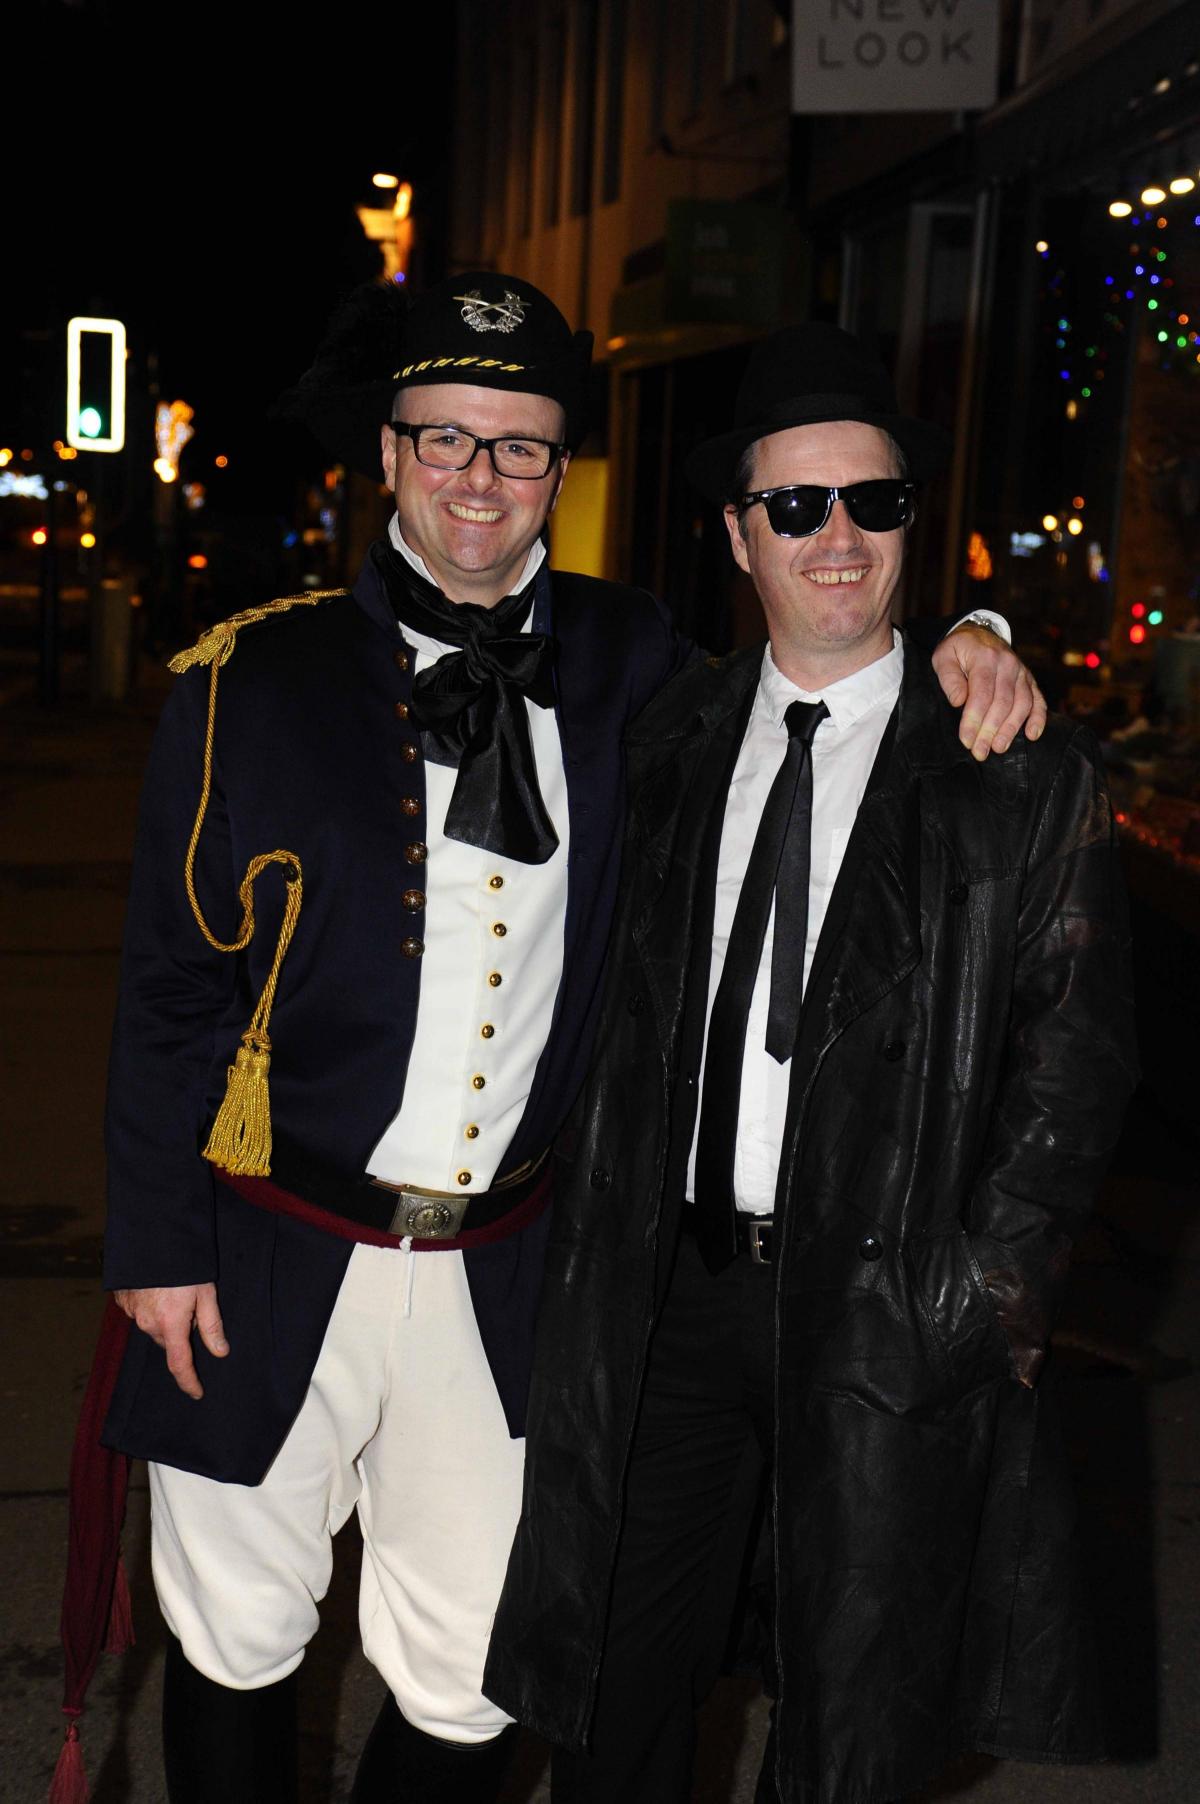 New Year's Eve in Bridport - Martin Baker and Steve Smith - Picture: Graham Hunt Photography